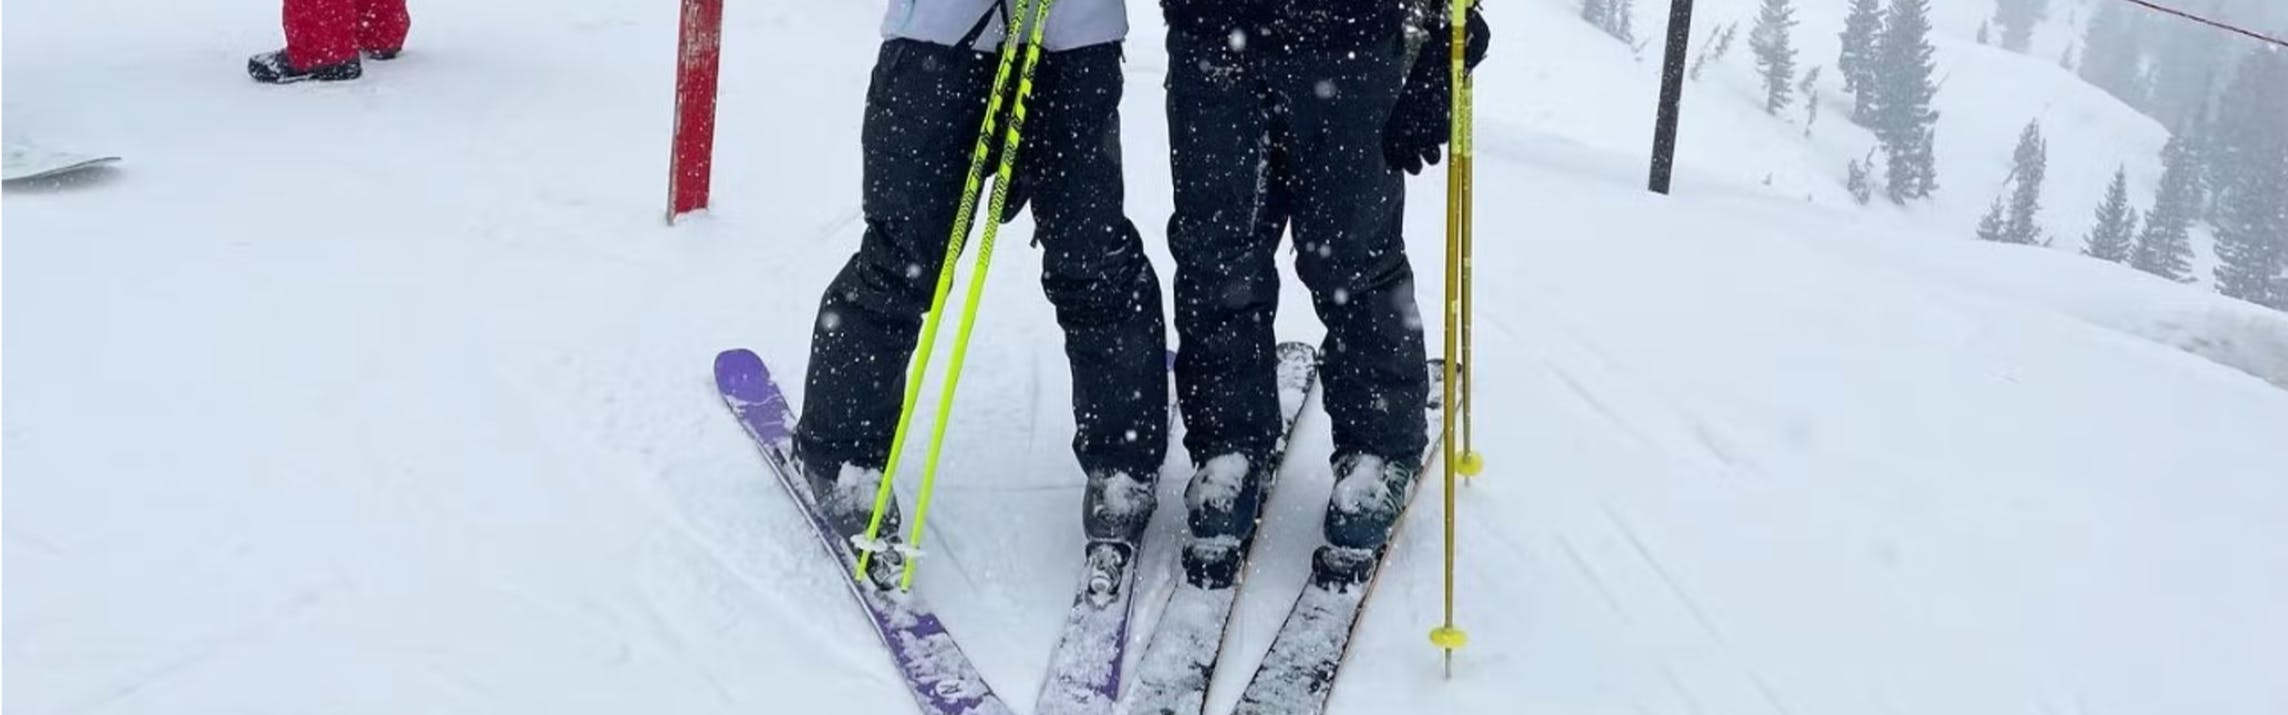 Two skiers stand on their skis. They are at a ski resort.